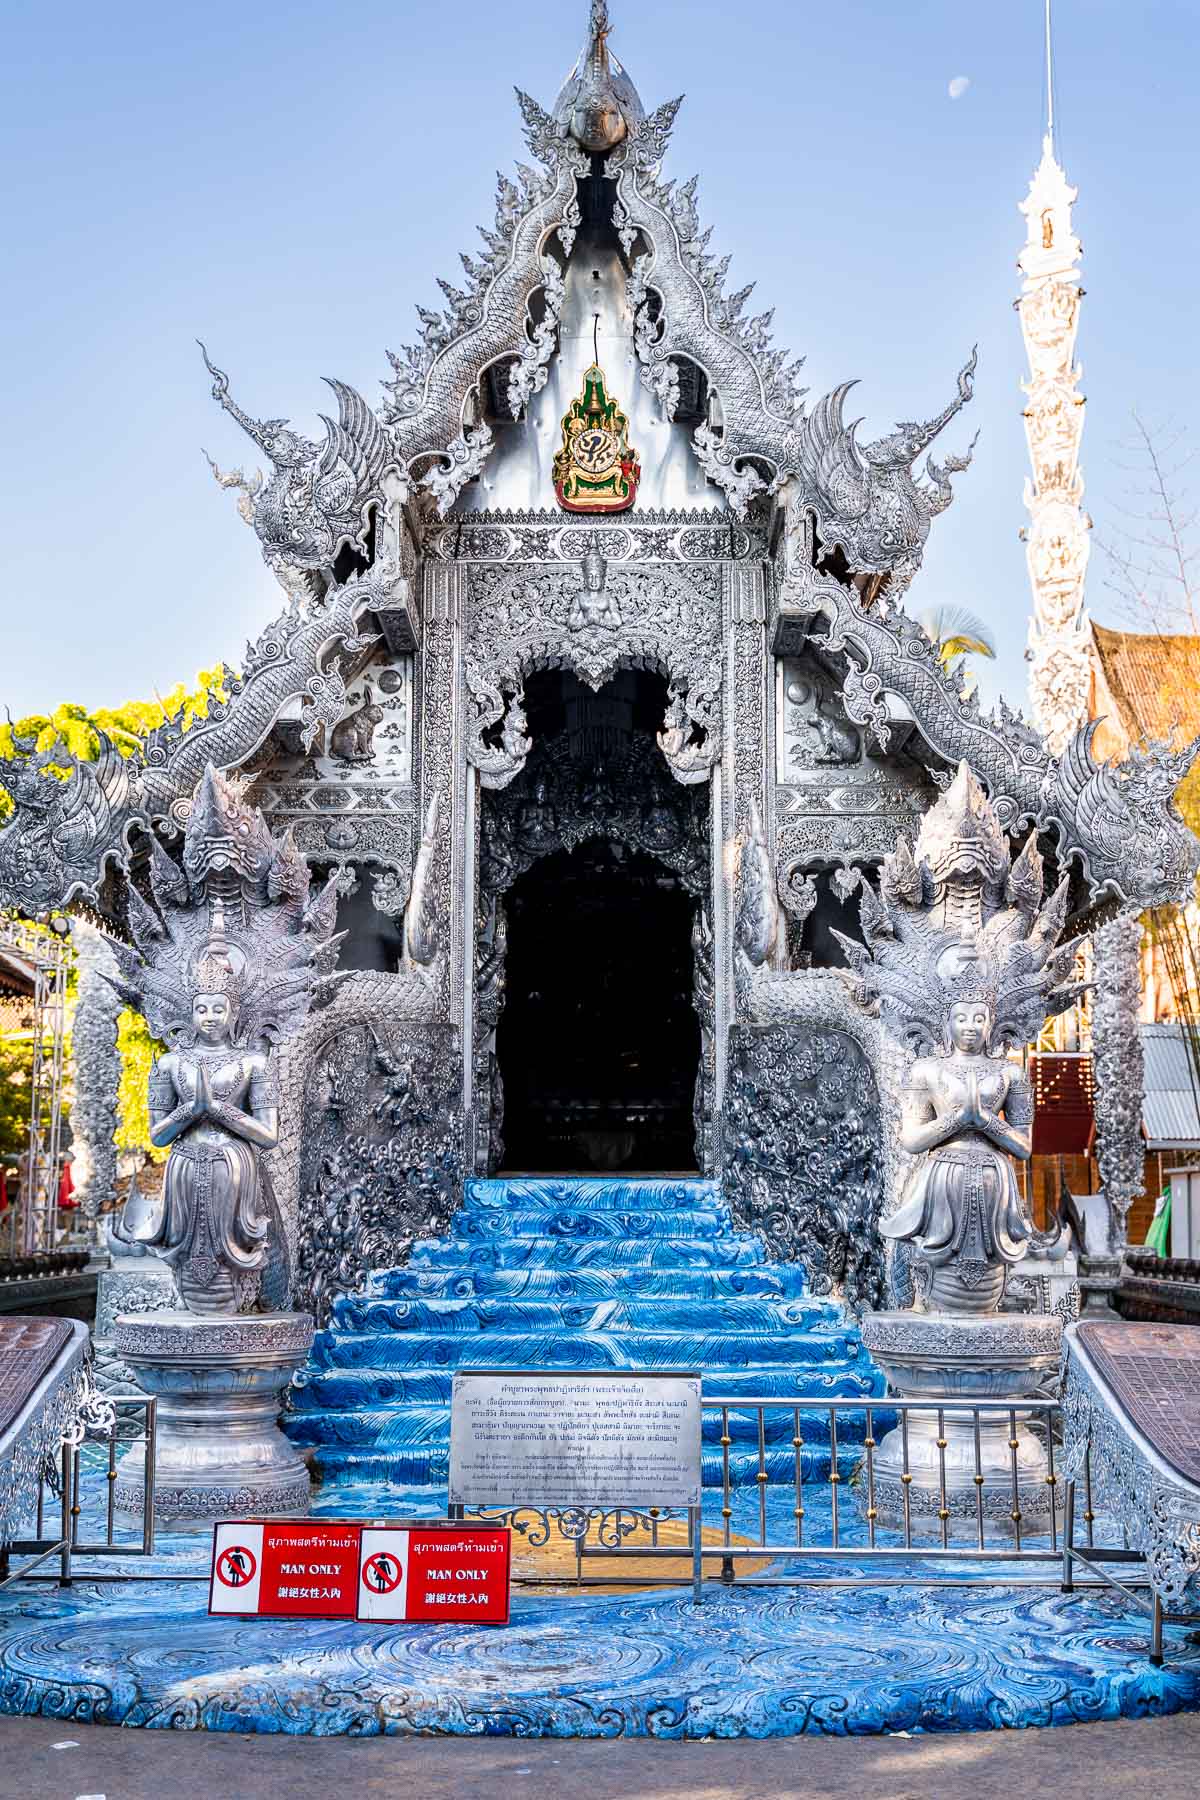 Wat Sri Suphan, the Silver Temple in Chiang Mai, Thailand